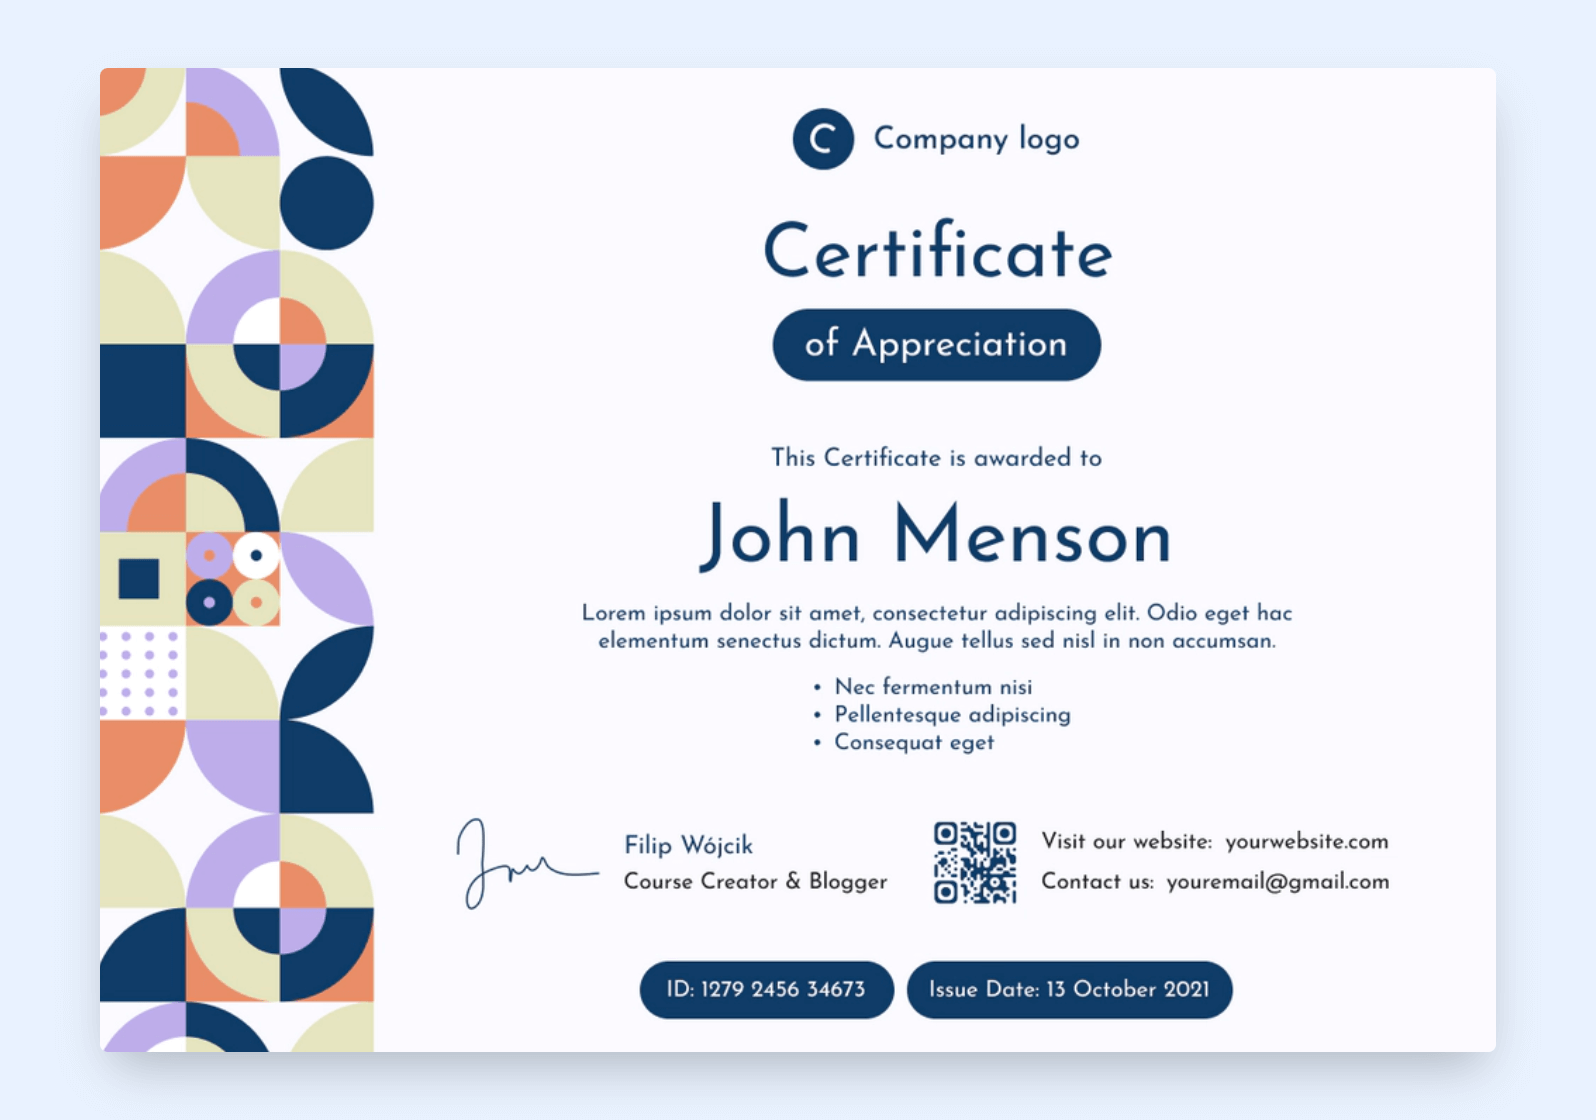 Corporate success diploma with abstract elements.